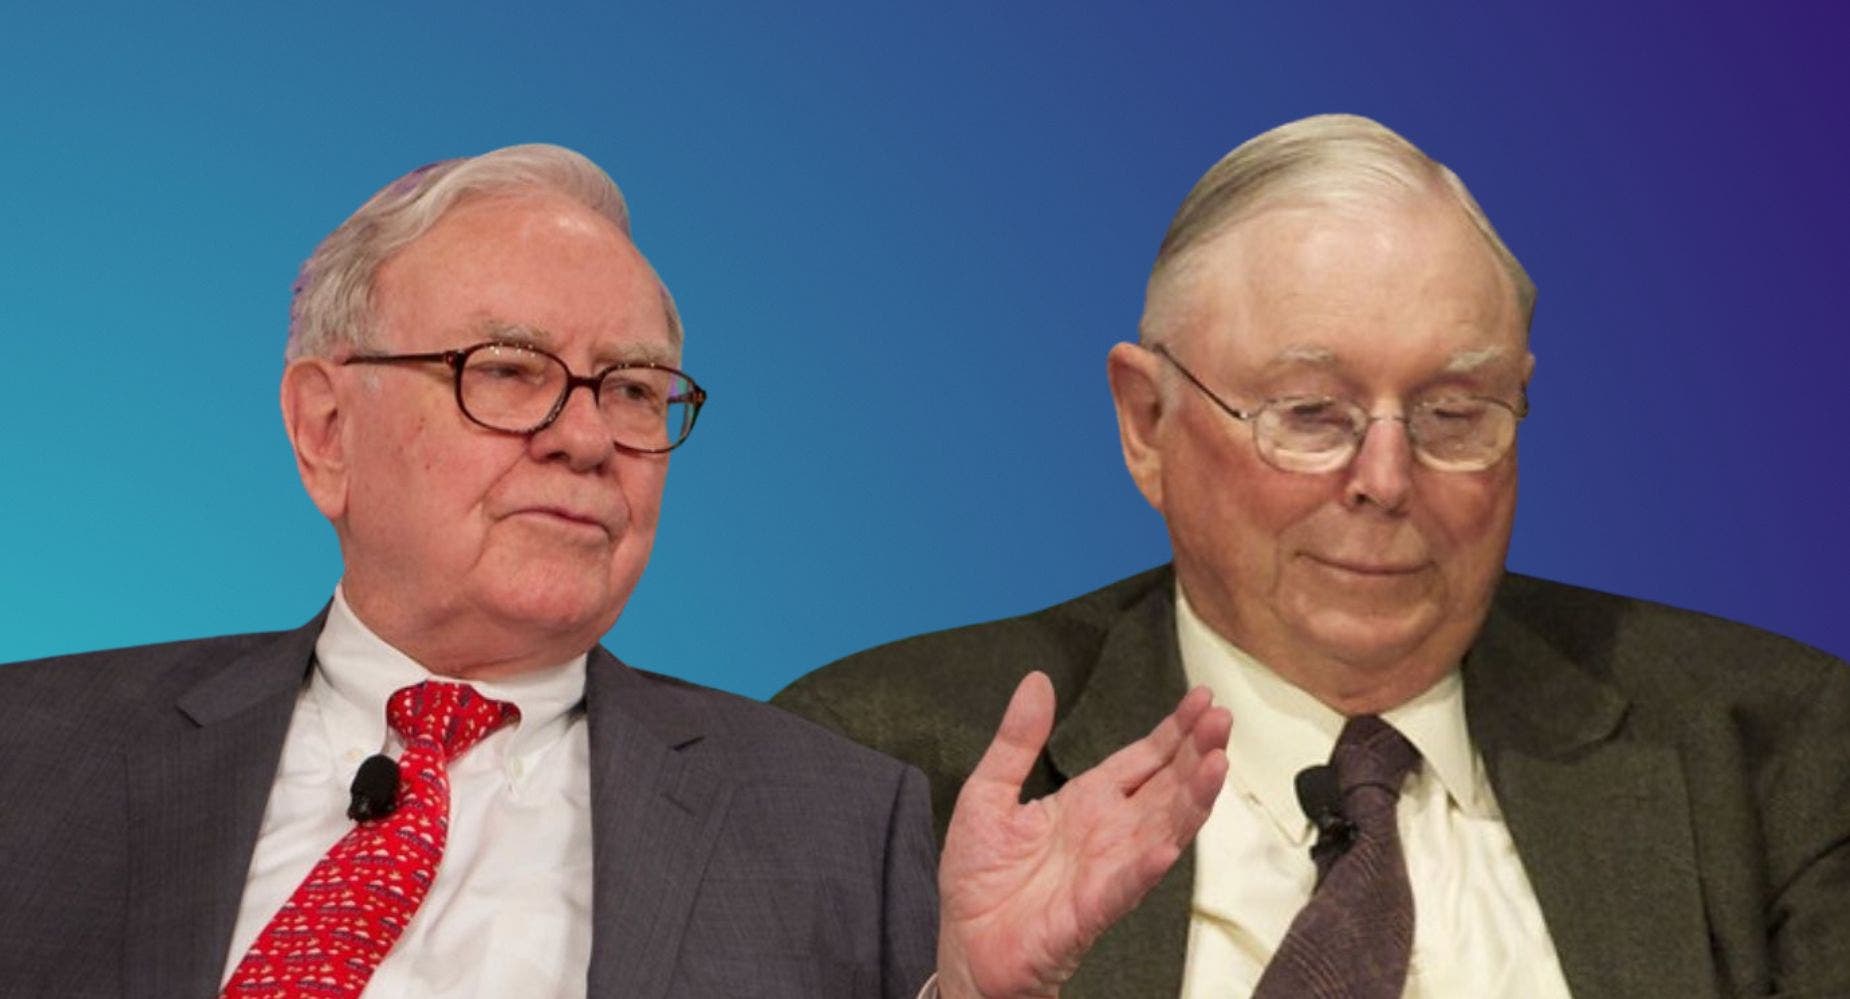 Charlie Munger Holds These 2 Dividend Stocks And Shares 1 With Warren Buffett